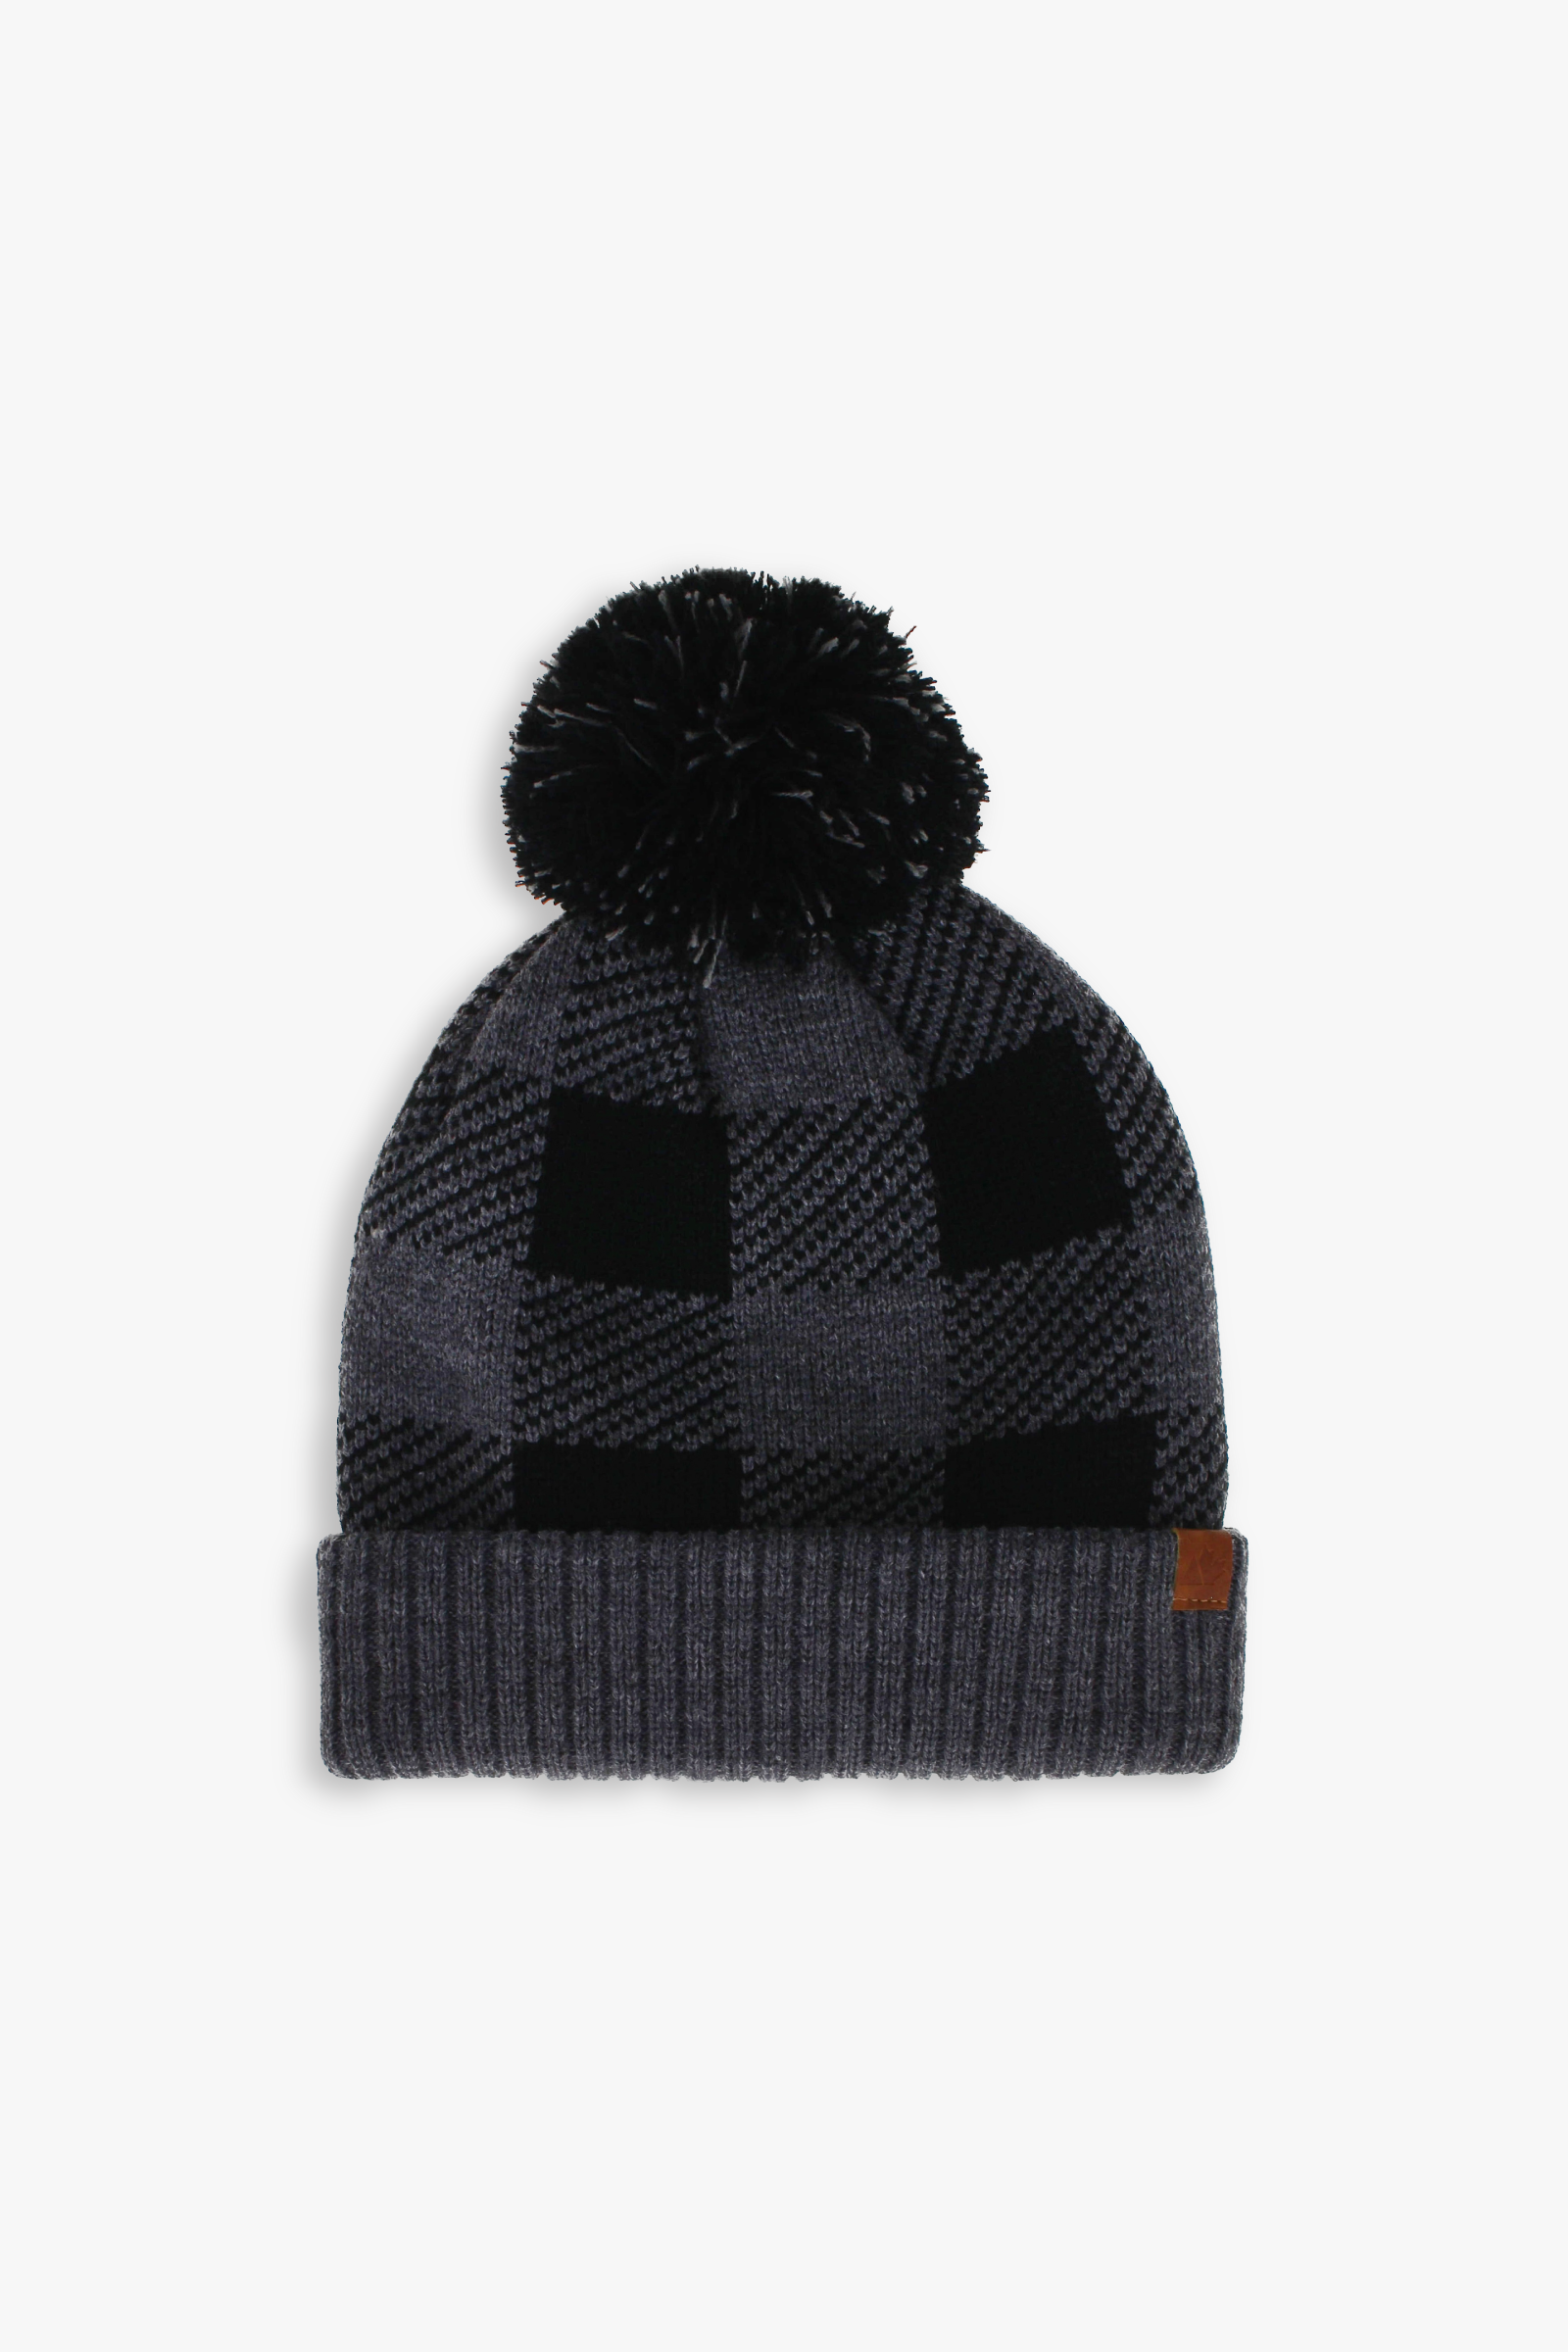 Great Northern Adult Unisex Plaid Faux Shearling Lined Plaid Pom-Pom Toque